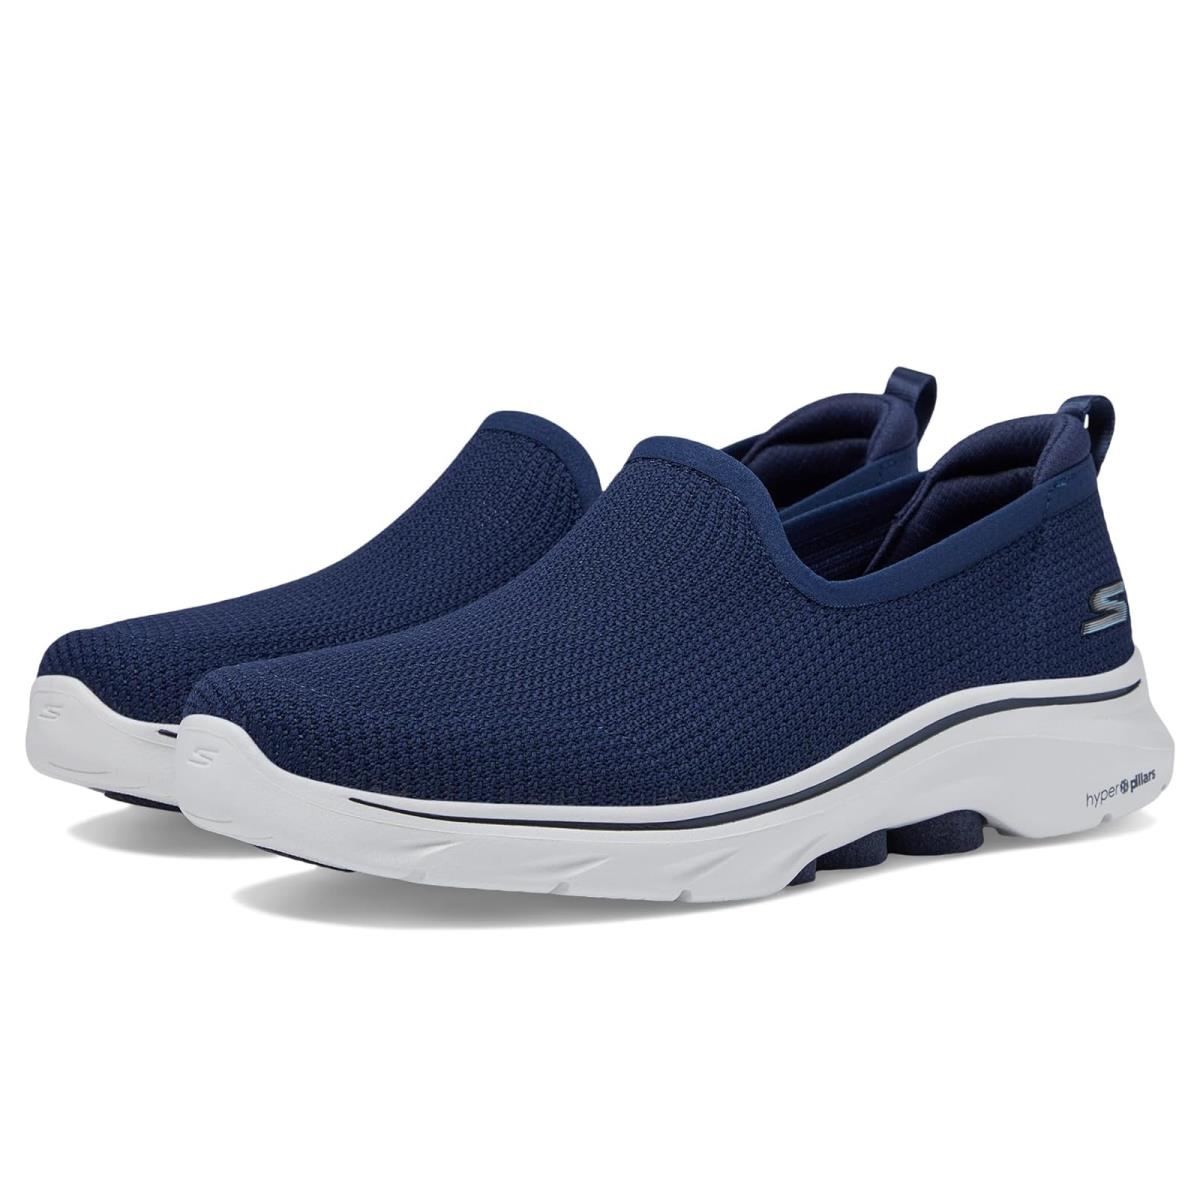 Woman`s Sneakers Athletic Shoes Skechers Performance Go Walk 7 - Ivy Navy/White